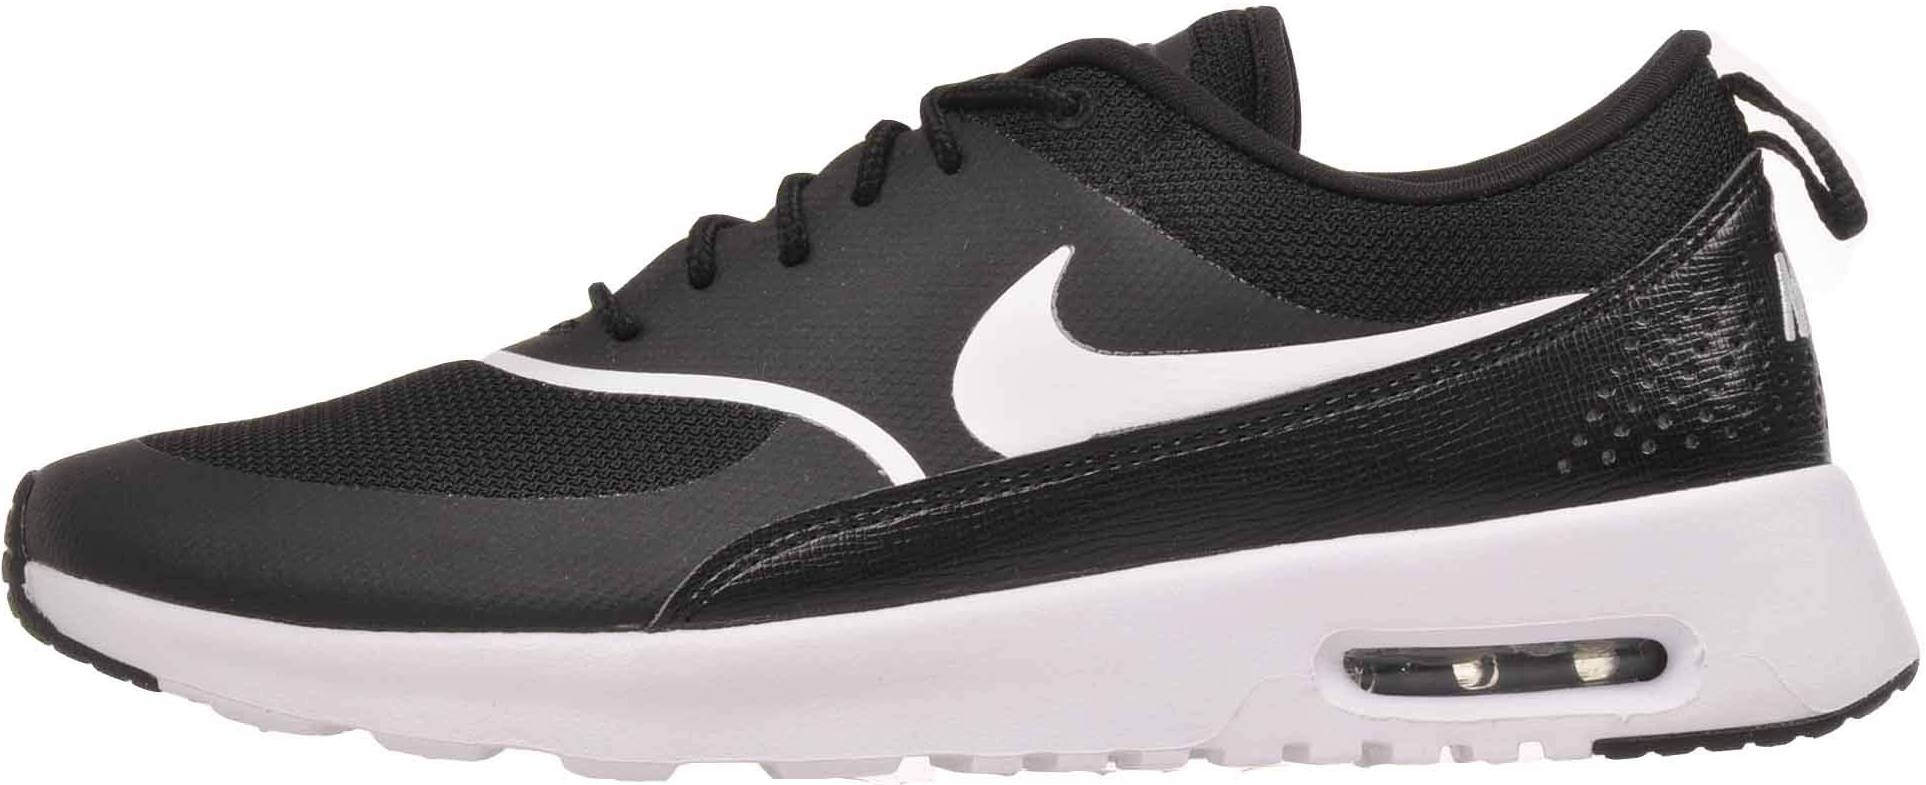 Only $47 + Review of Nike Air Max Thea 